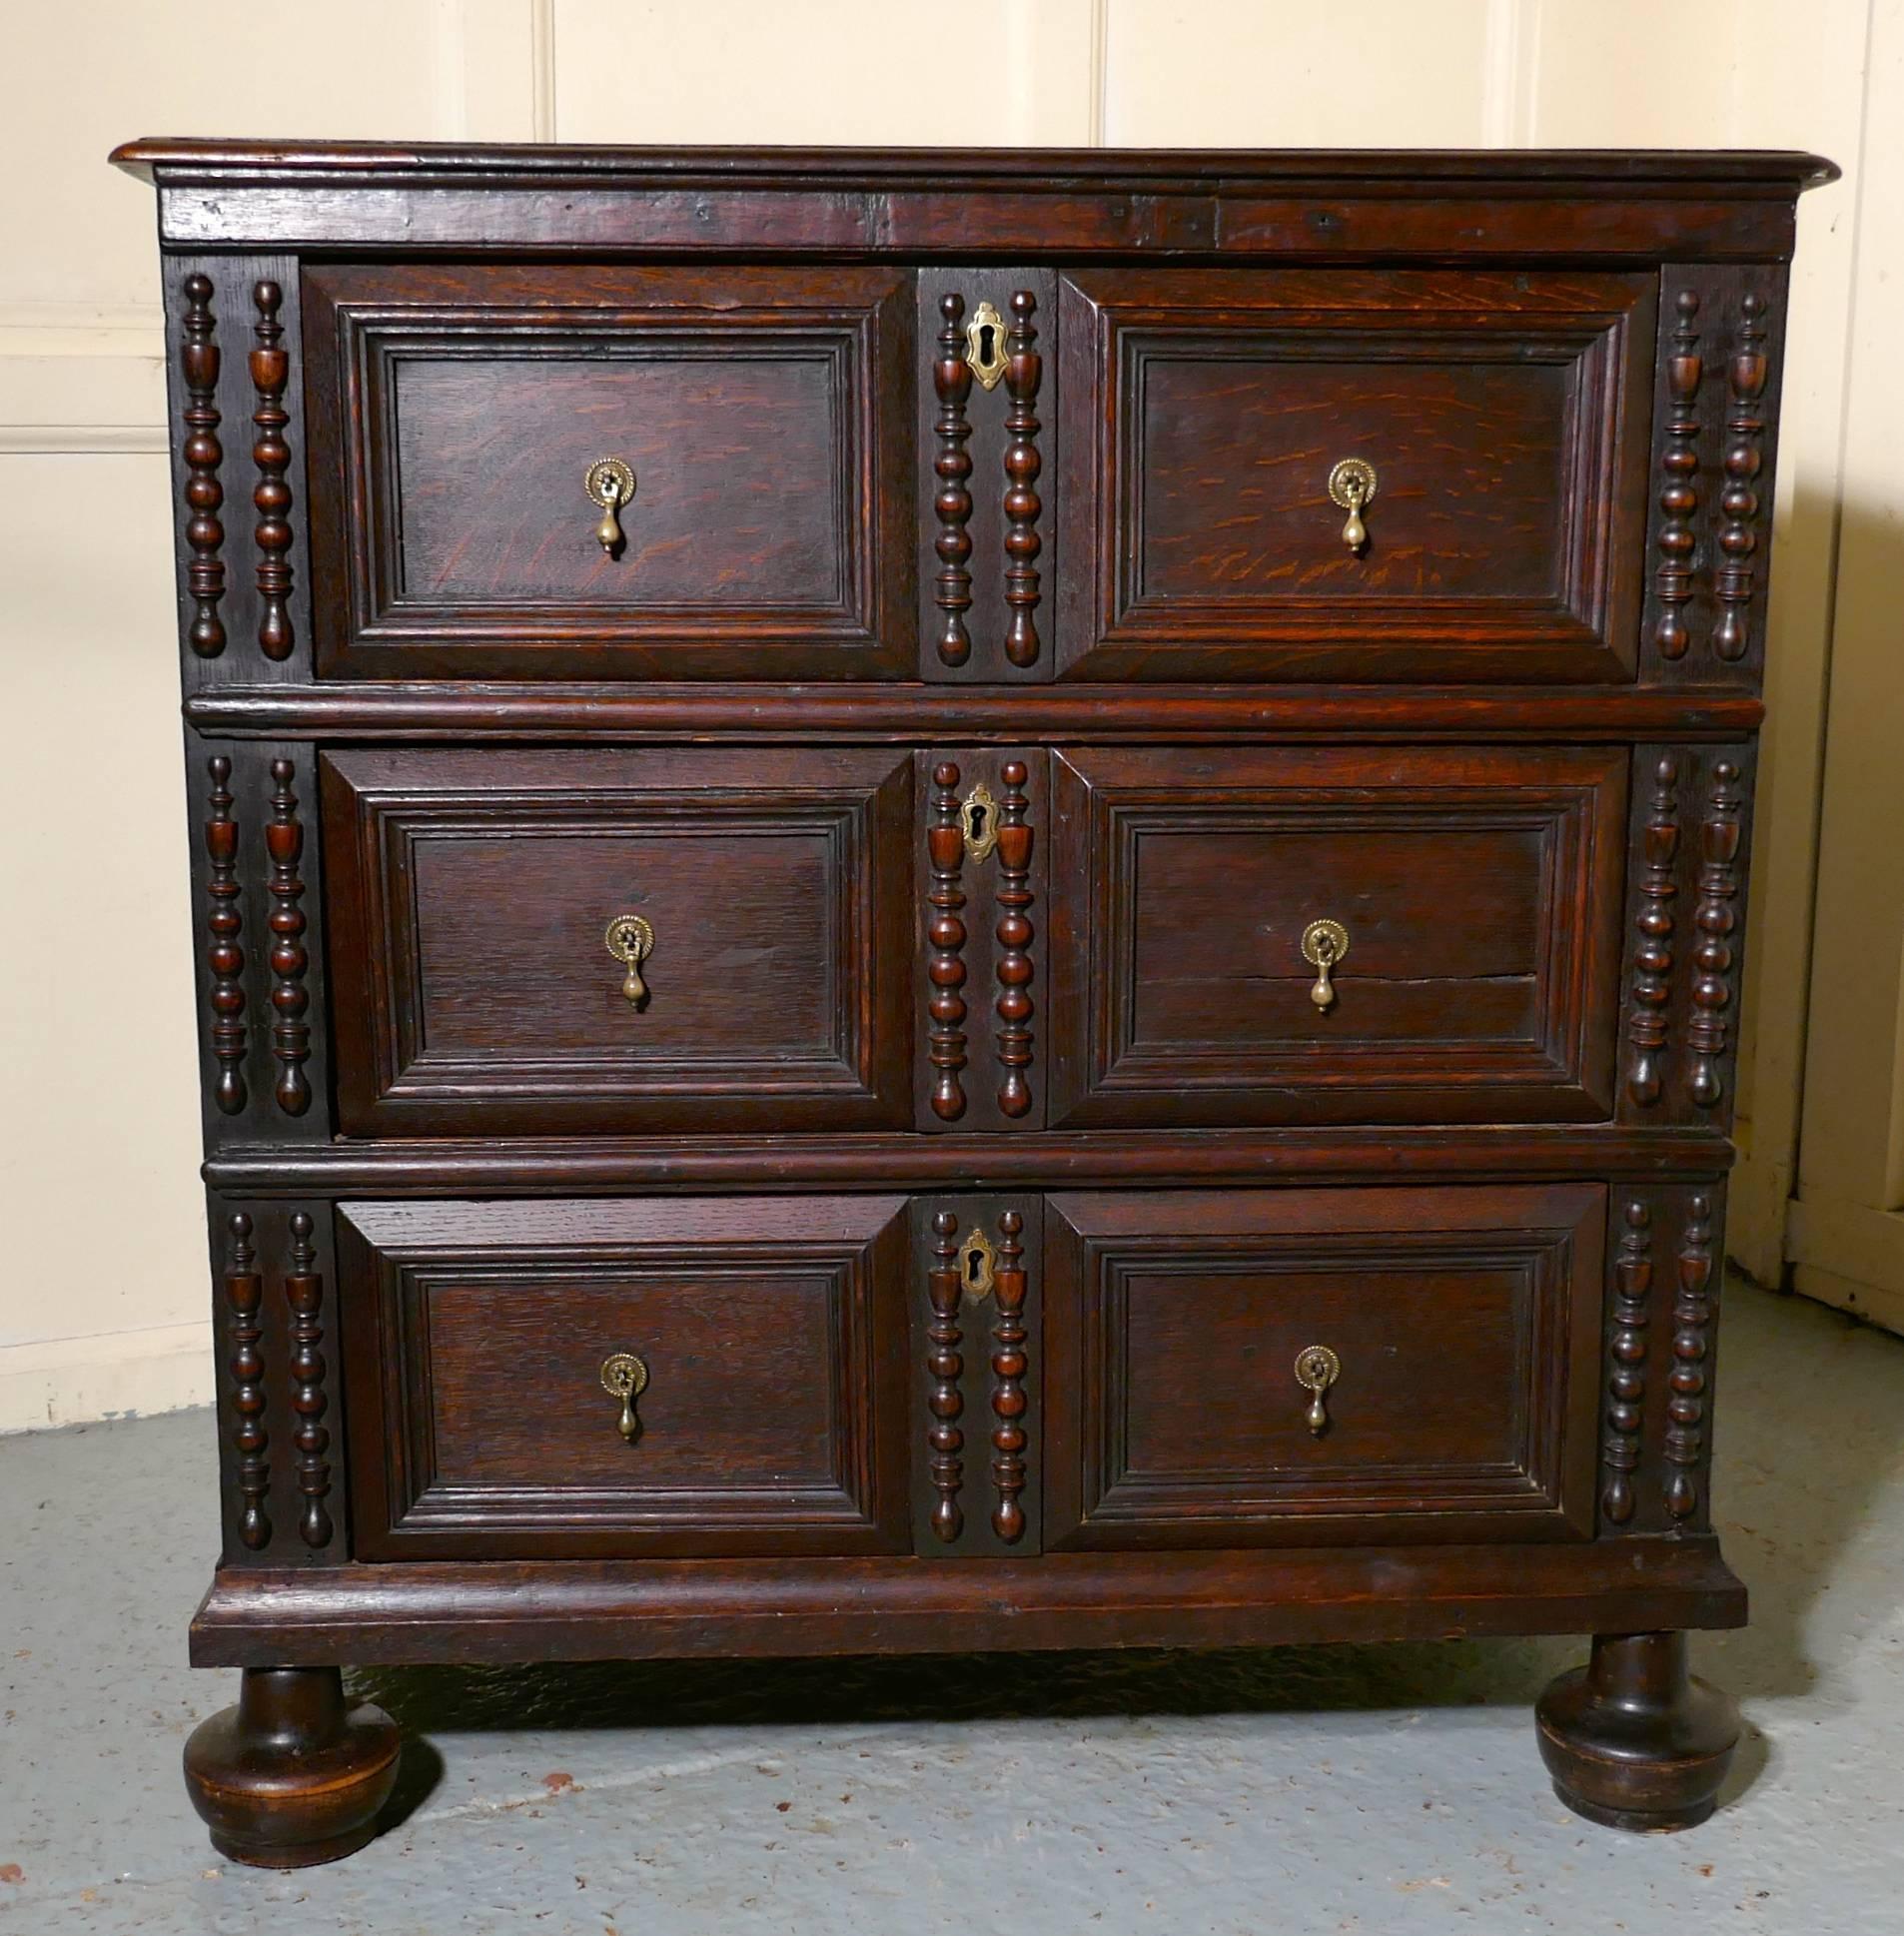 17th century small oak chest of drawers

This is a lovely piece dating from circa 1680, it is a small beautiful proportioned chest with 3 long drawers. The fronts of the drawers are decorated in deeply moulded Geometric Panels, the handles and